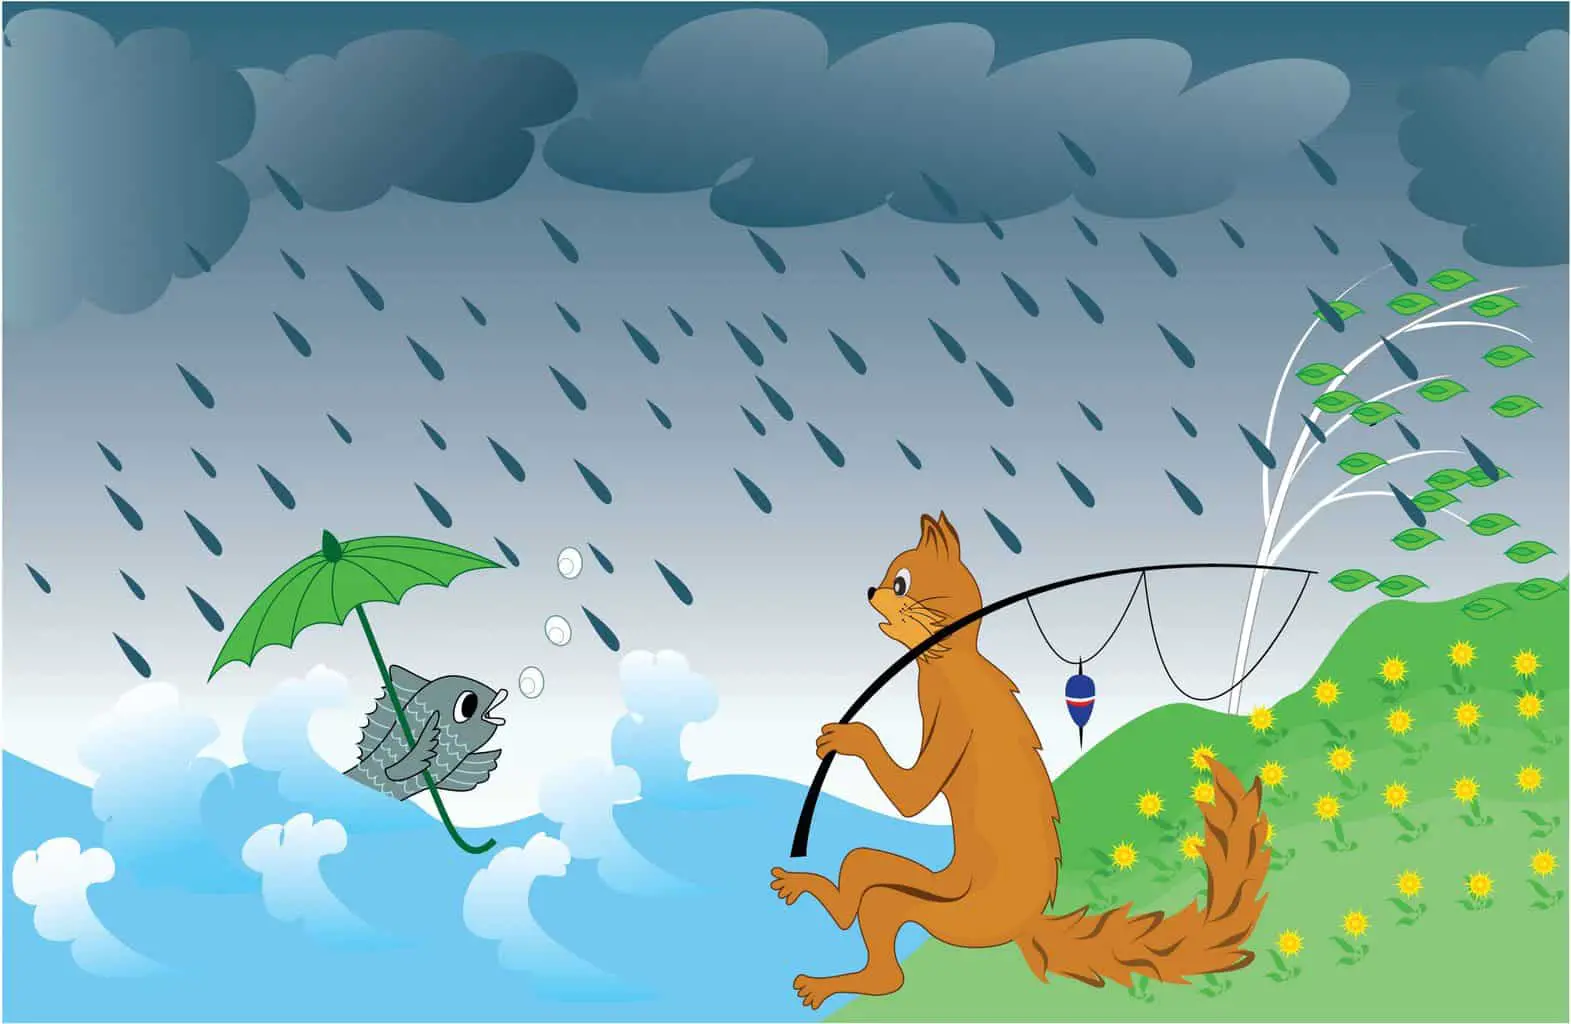 A cat fishing in the rain wondering about the fish who has an umbrella. is fishing in the rain good?